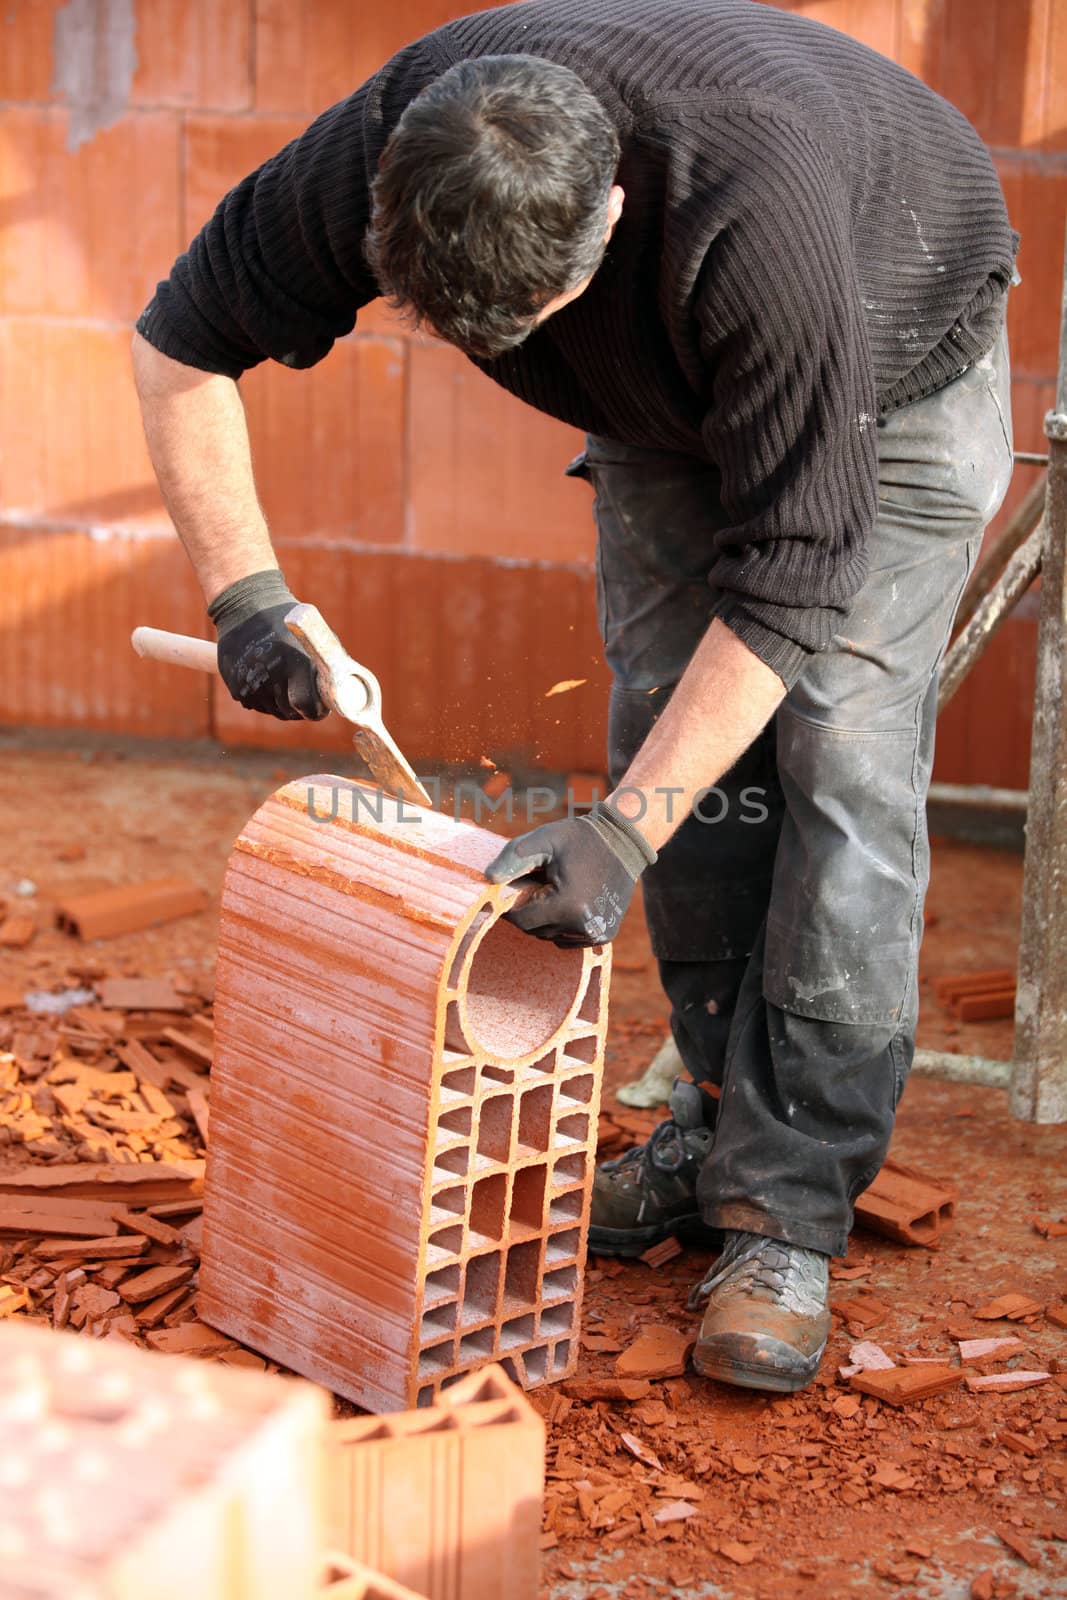 Man shaping a brick by phovoir